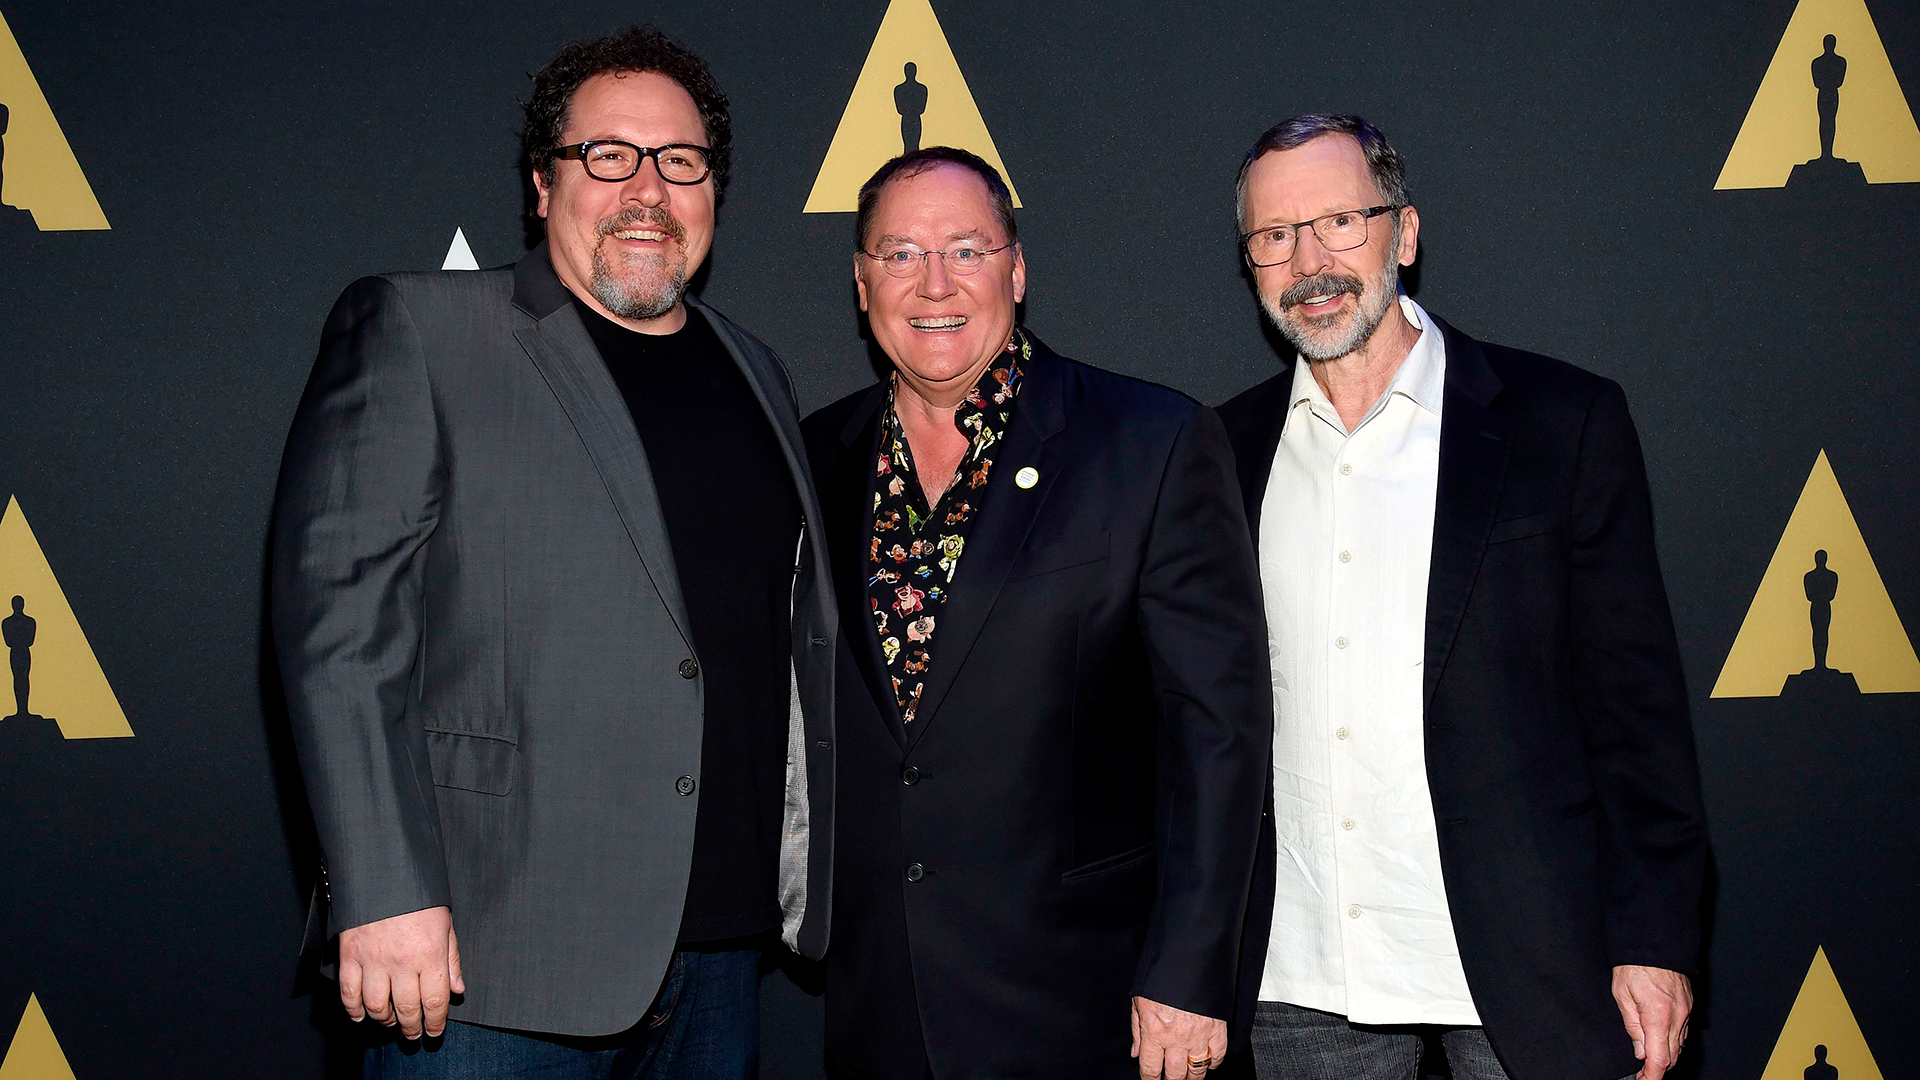 John Lasseter, Ed Catmull and 'Toy Story' Team Talk 20th Anniversary